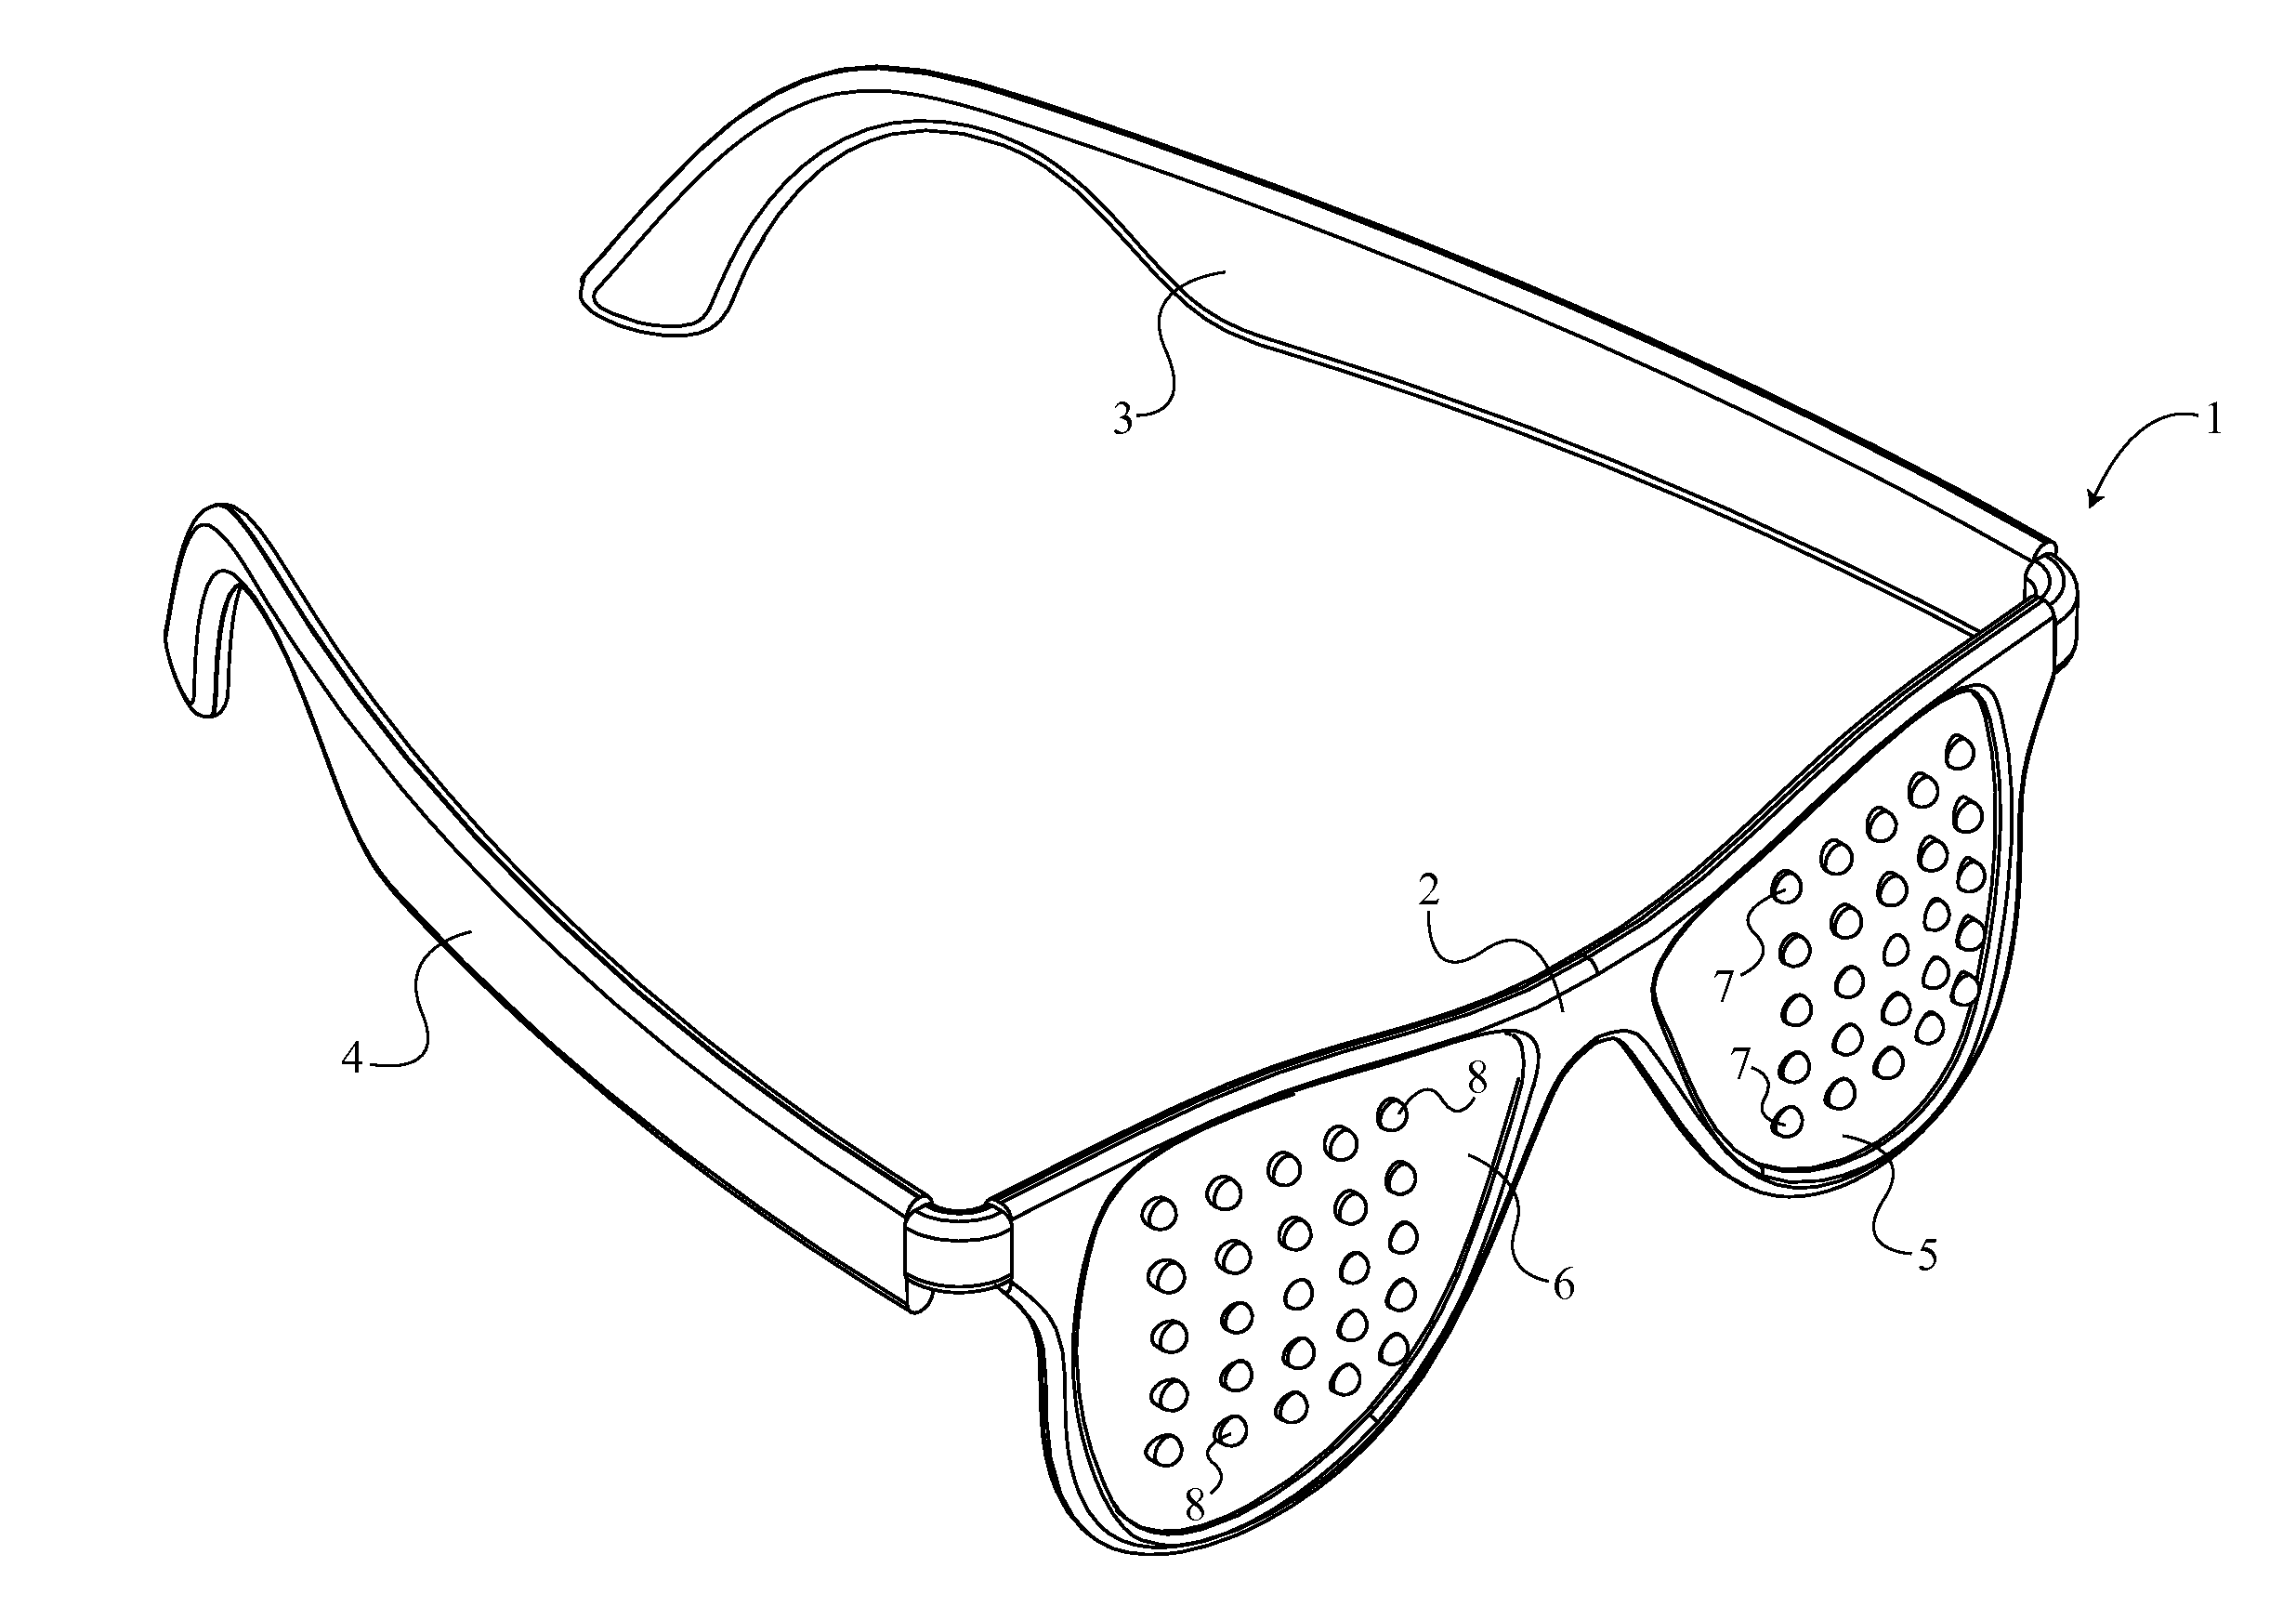 Eyewear with a Pair of Light Emitting Diode Matrices